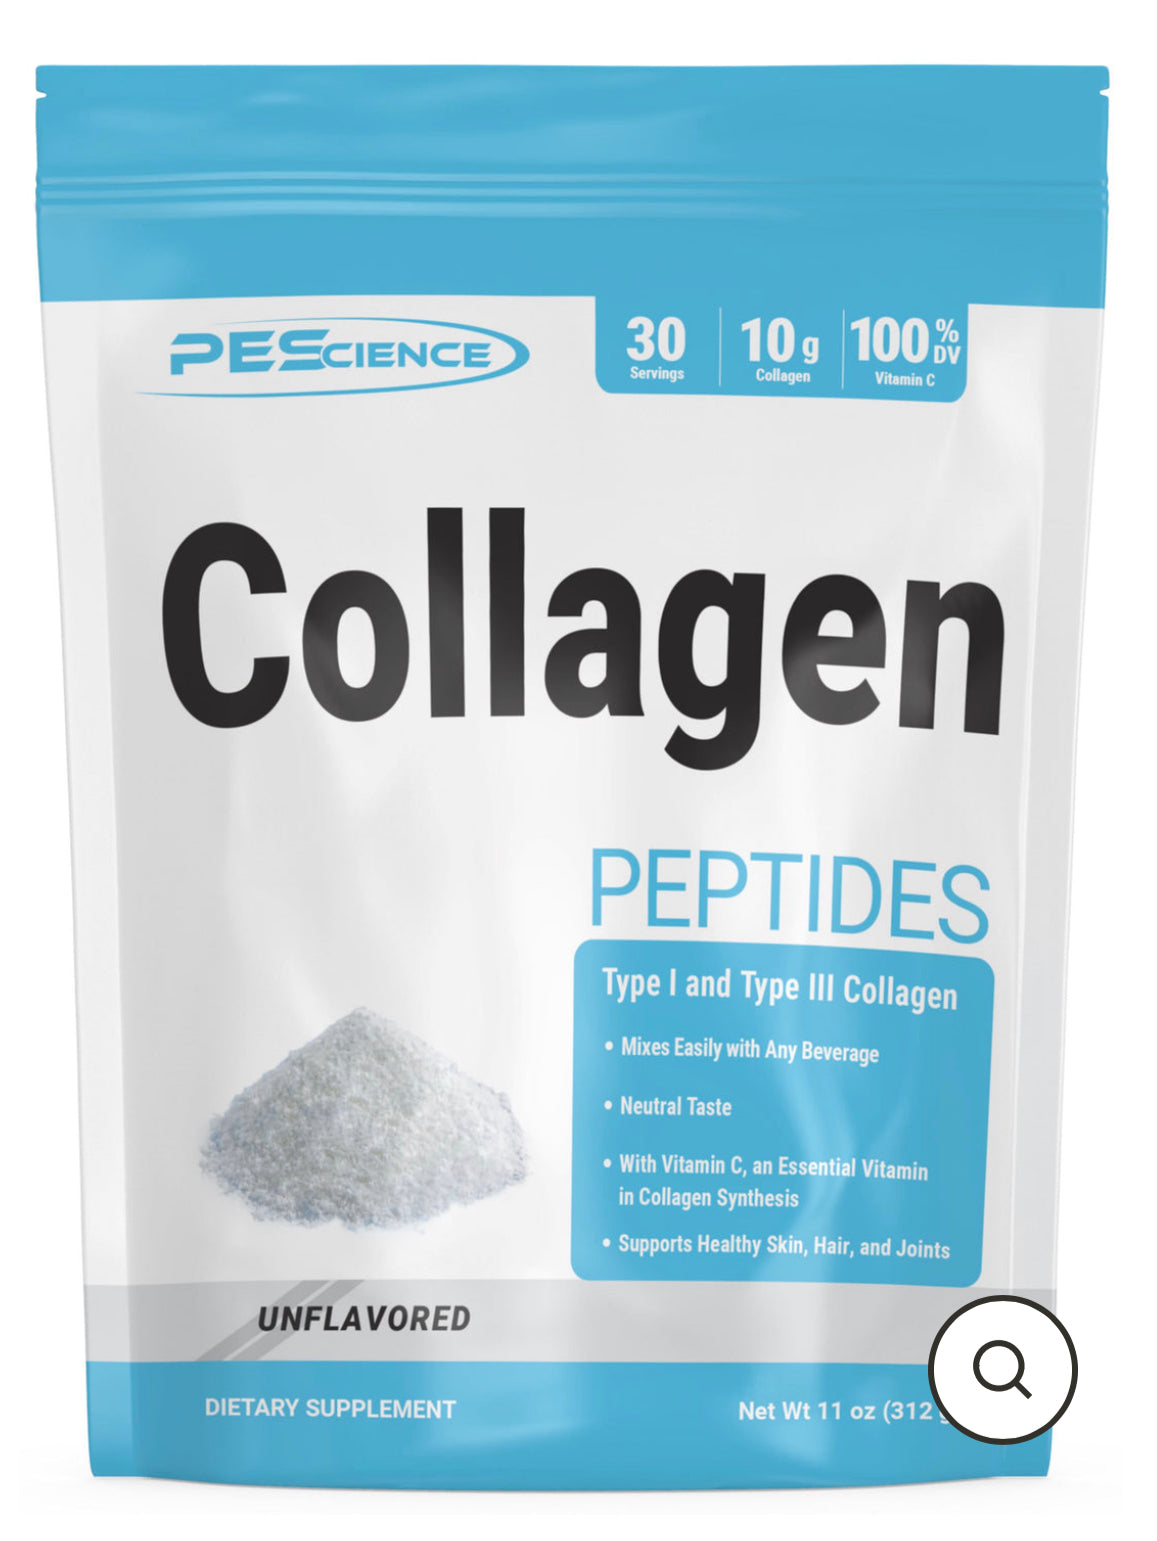 PESCIENCE COLLAGEN PEPTIDES